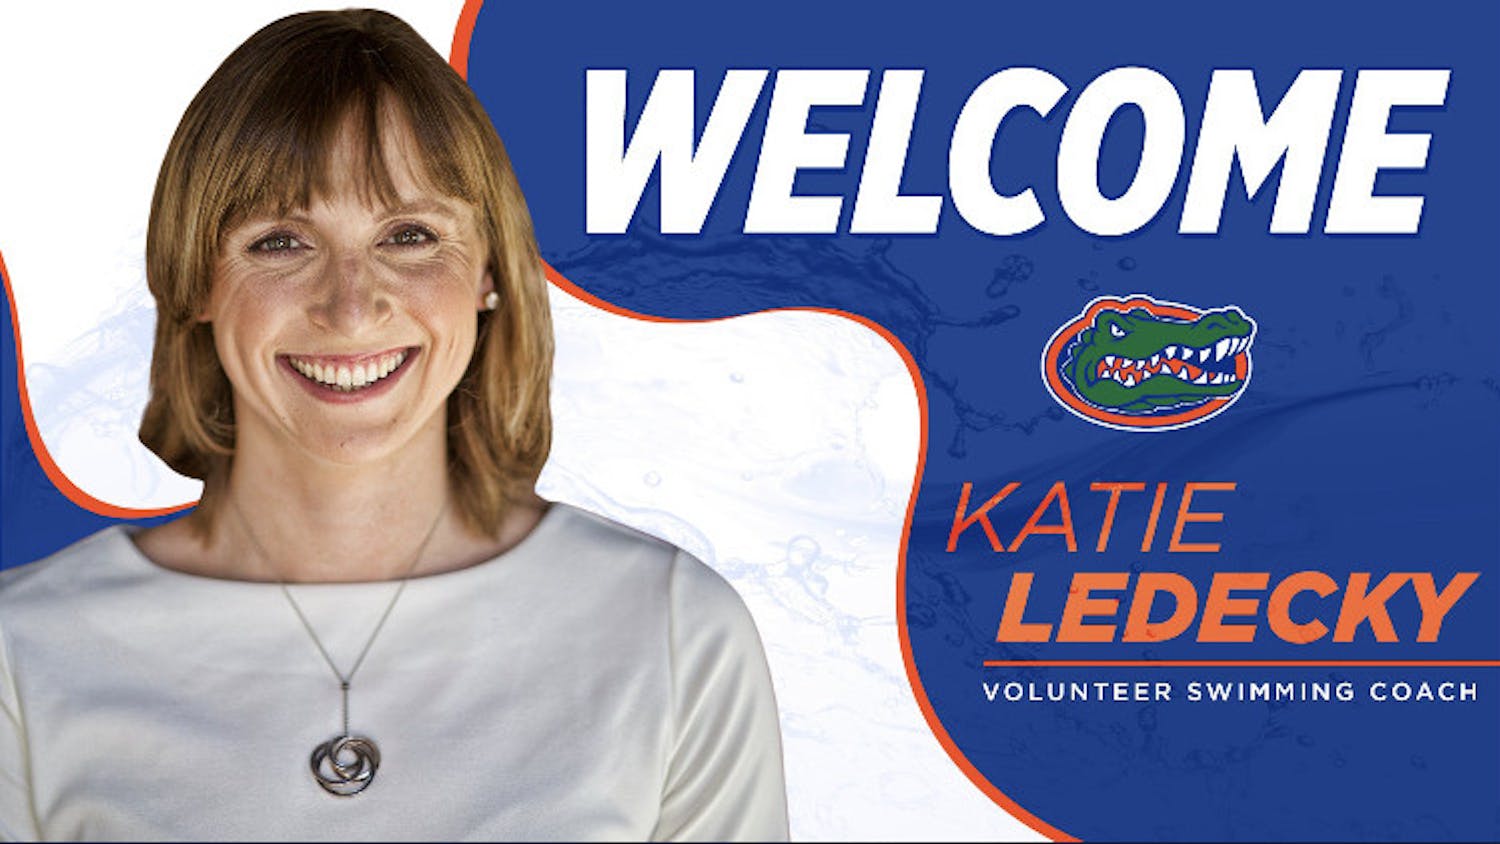 Swimming legend Katie Ledecky announced Wednesday she'd join UF's program as a volunteer swimming coach.